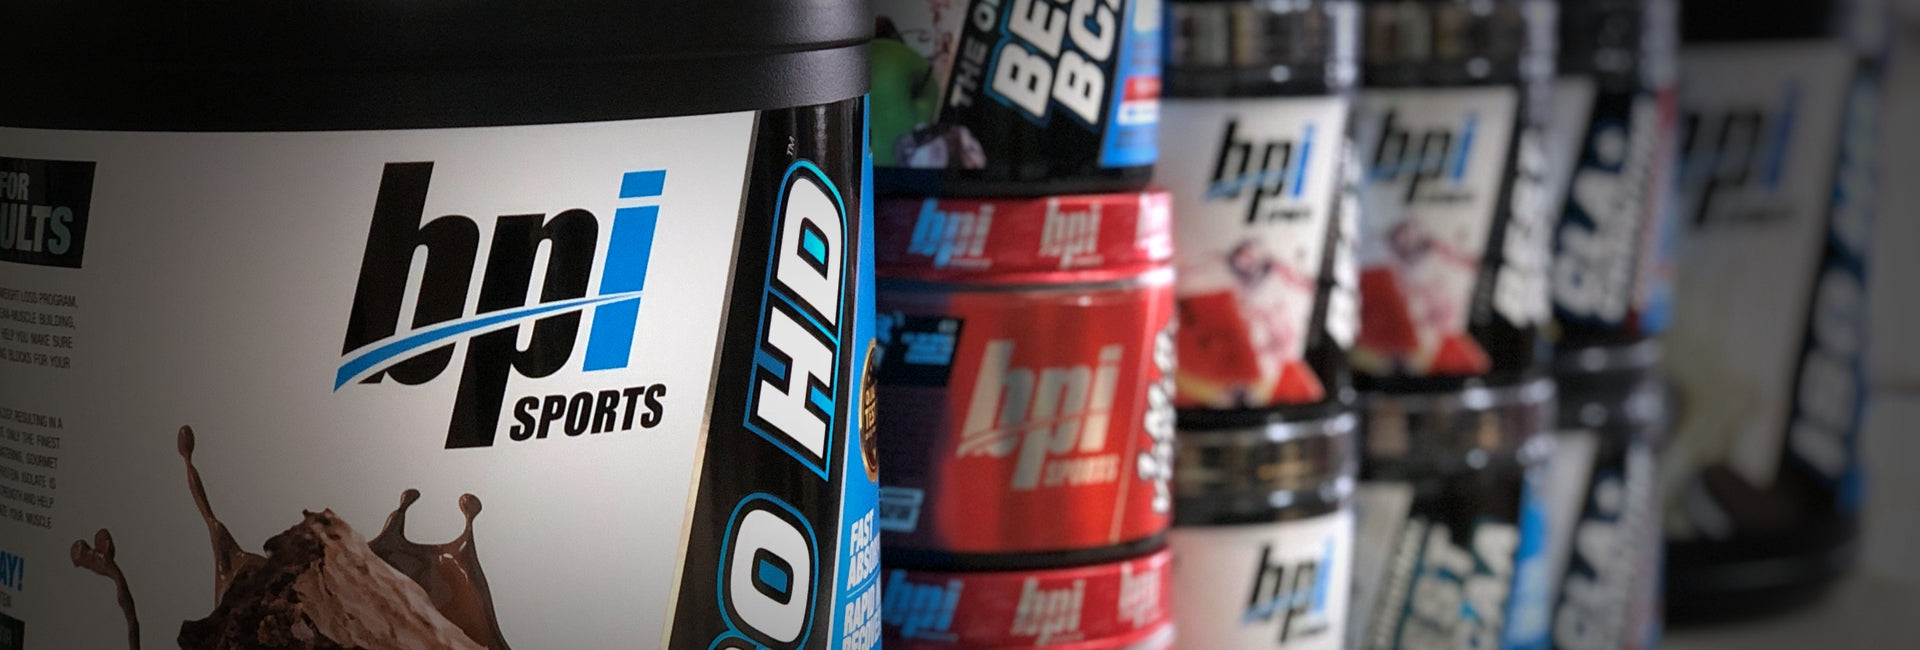 BPI Sports family of products